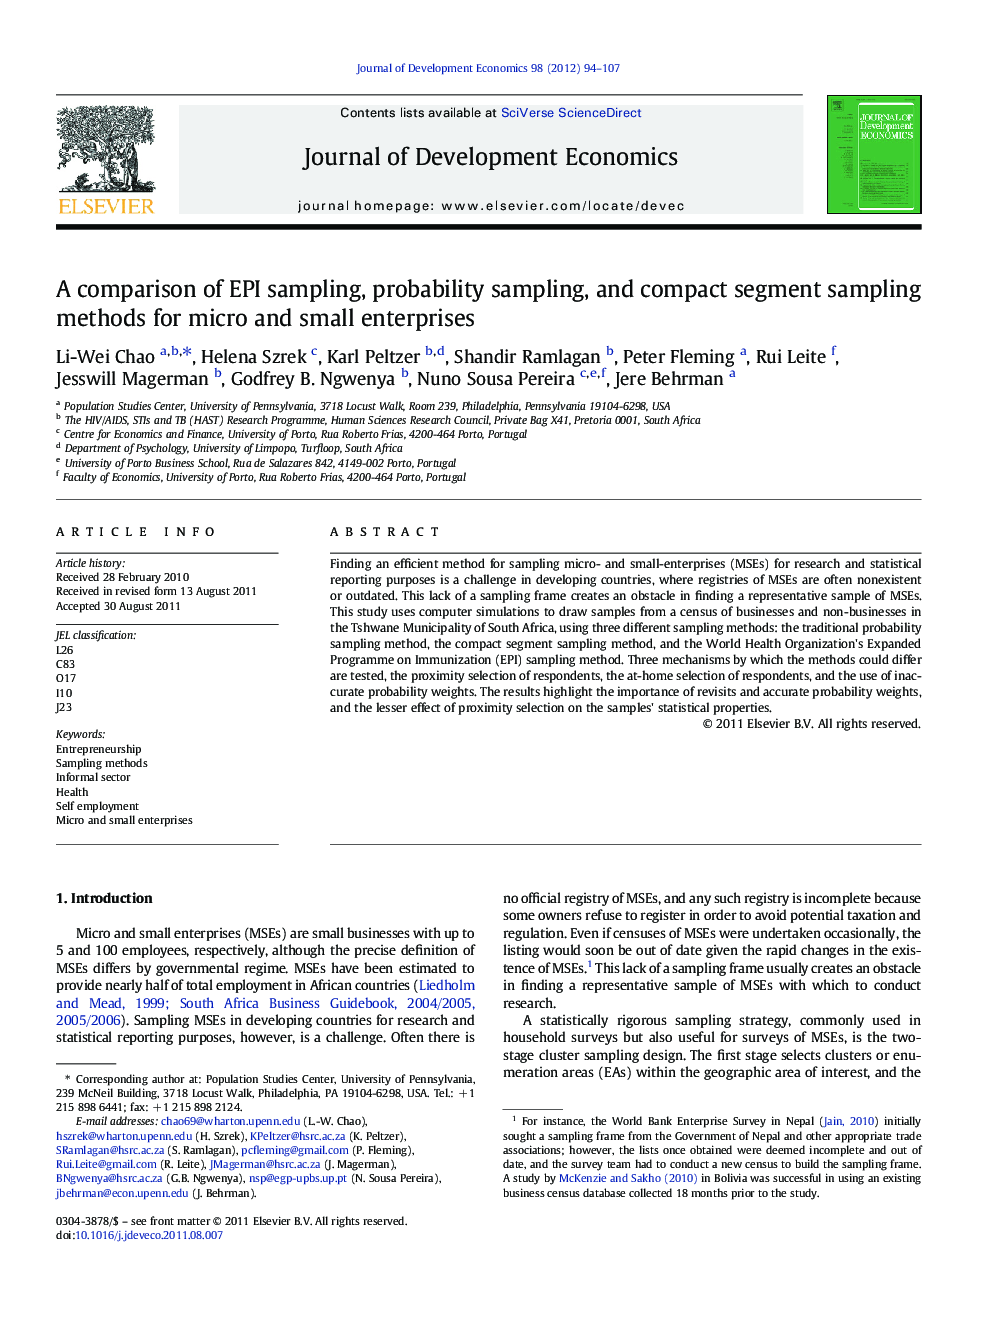 A comparison of EPI sampling, probability sampling, and compact segment sampling methods for micro and small enterprises